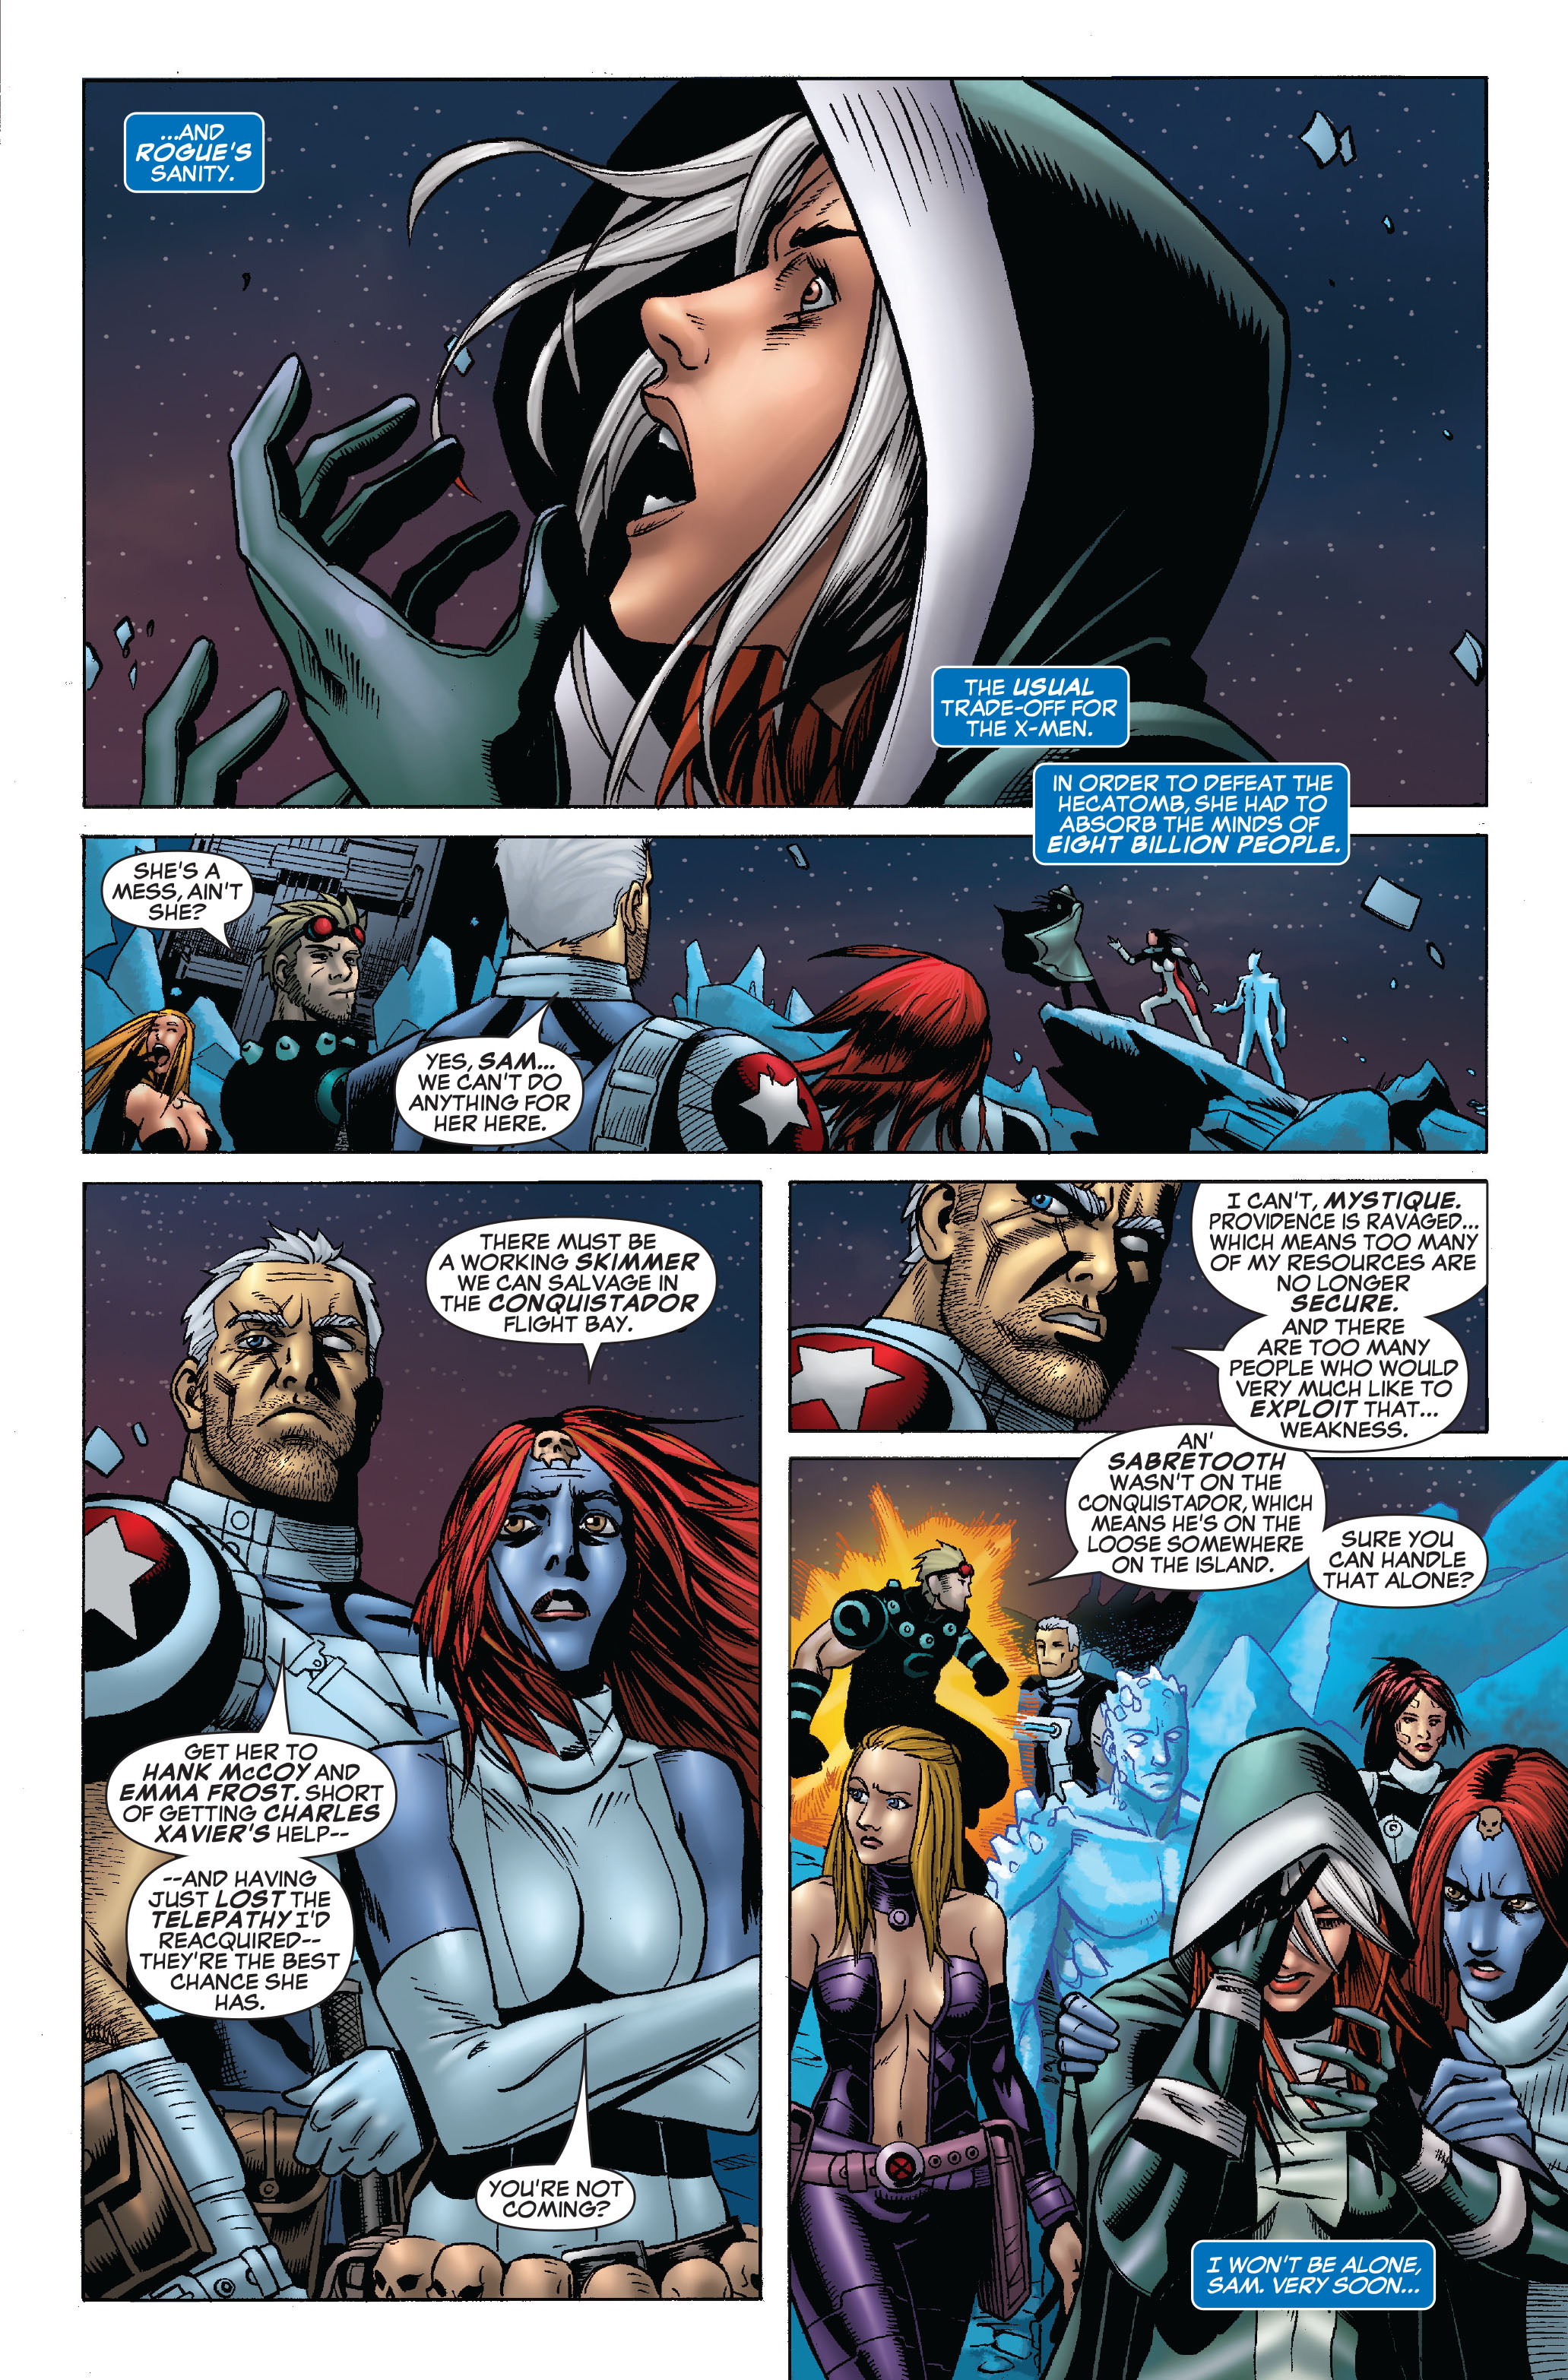 Deadpool Mystique Porn - Cable And Deadpool Issue 41 | Read Cable And Deadpool Issue 41 comic online  in high quality. Read Full Comic online for free - Read comics online in  high quality .